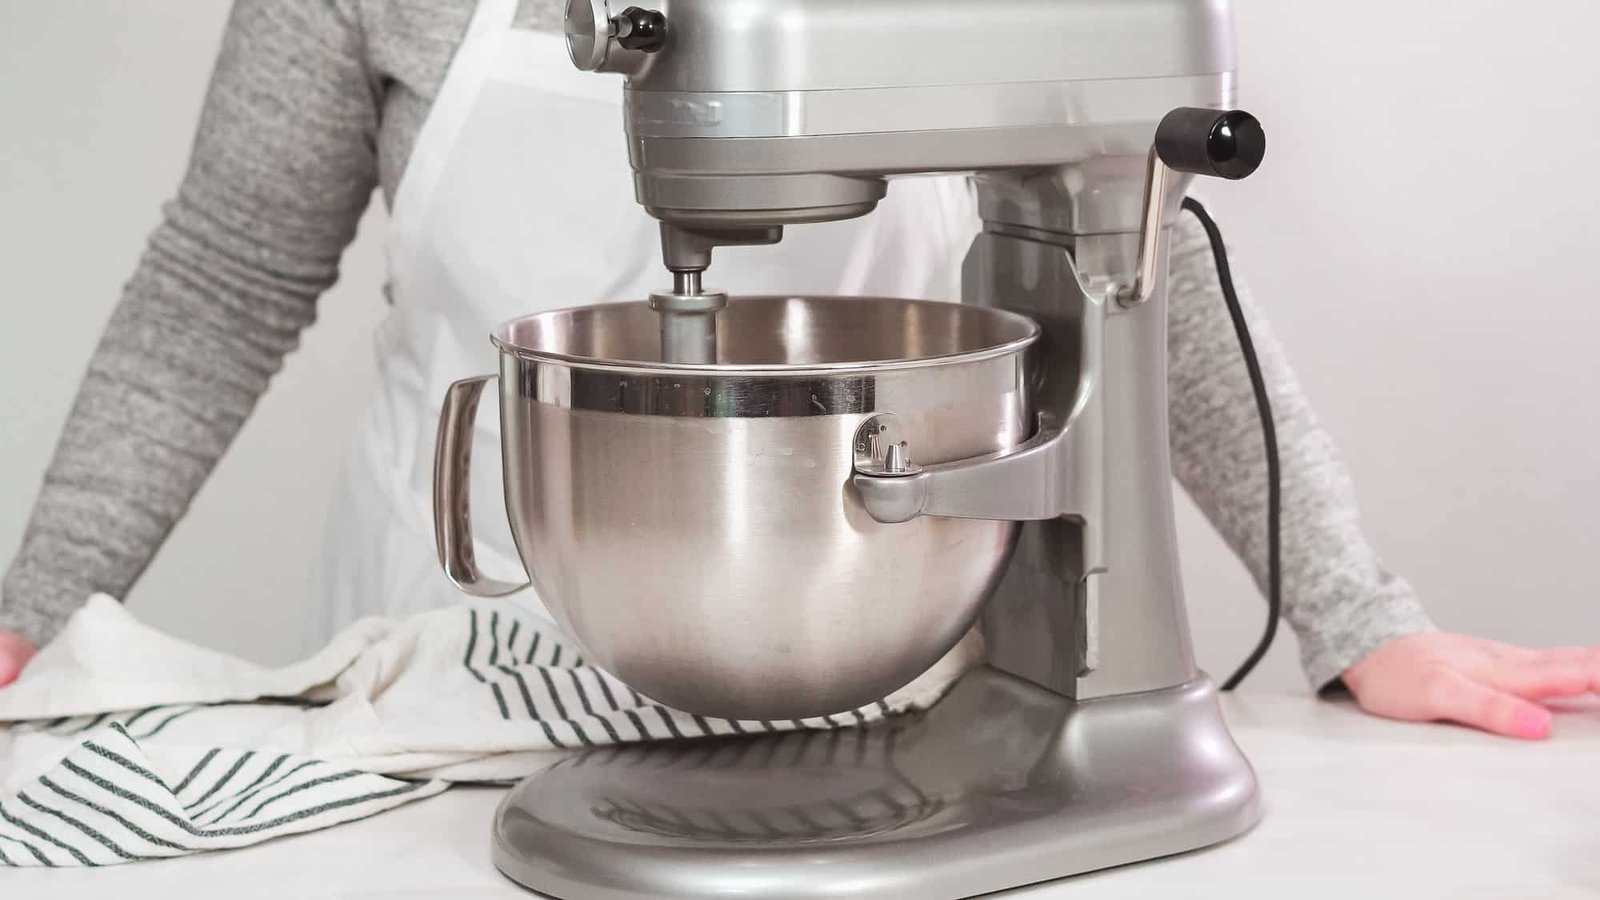 KitchenAid Classic Series 4.5 Quart Tilt-Head Stand Mixer K45SS, White -  household items - by owner - housewares sale